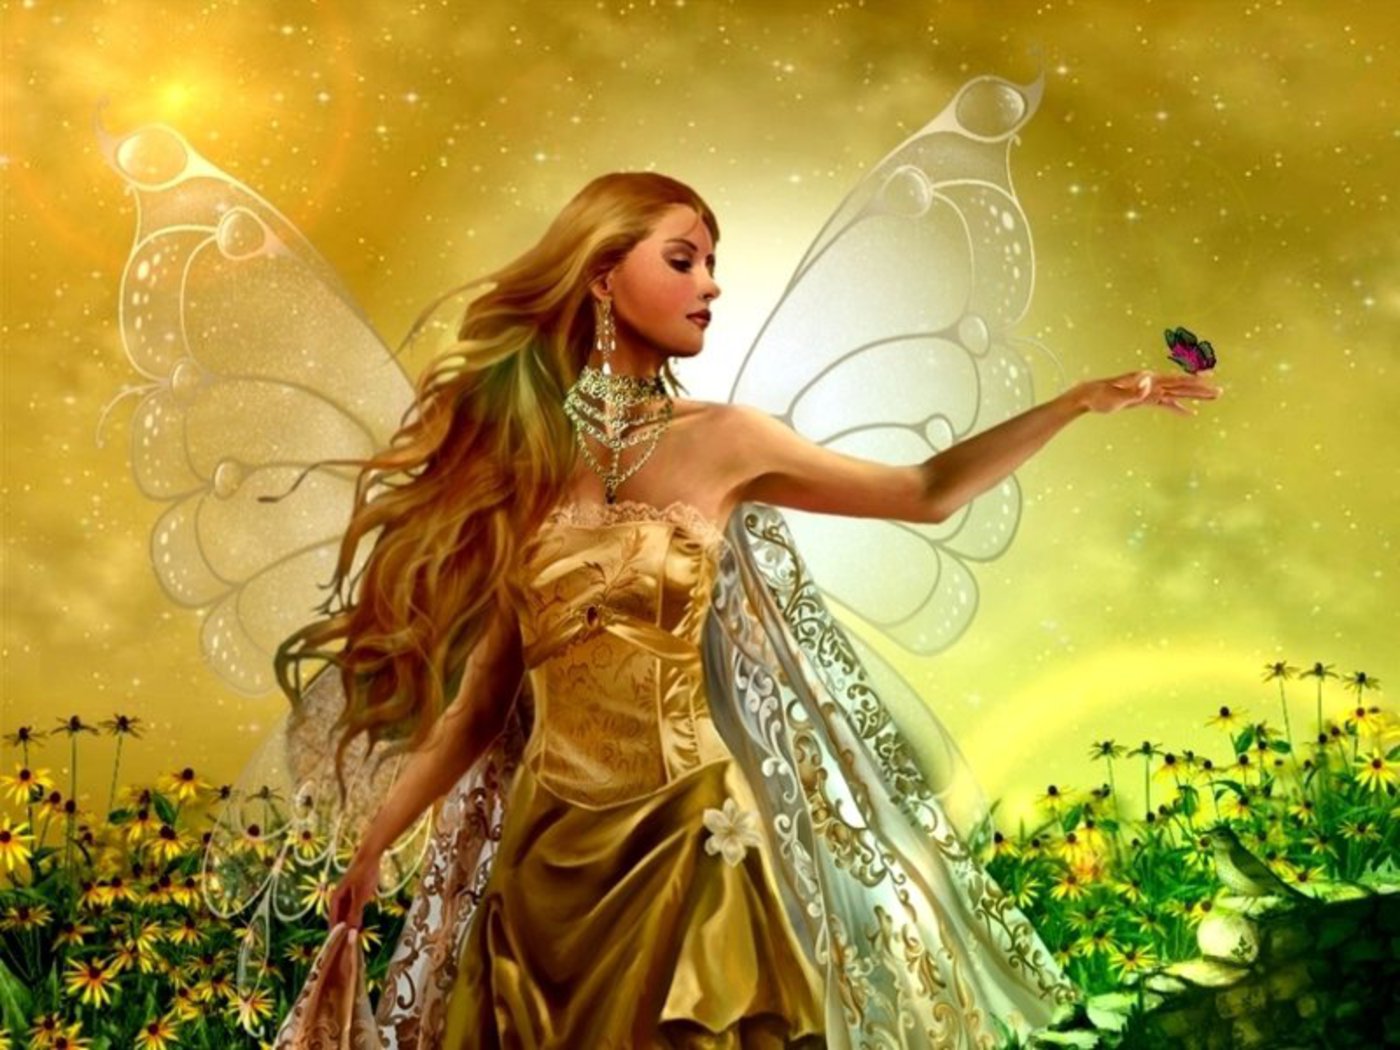  Fairy And Butterfly Angel Wallpaper 1400x1050 Full HD Wallpapers